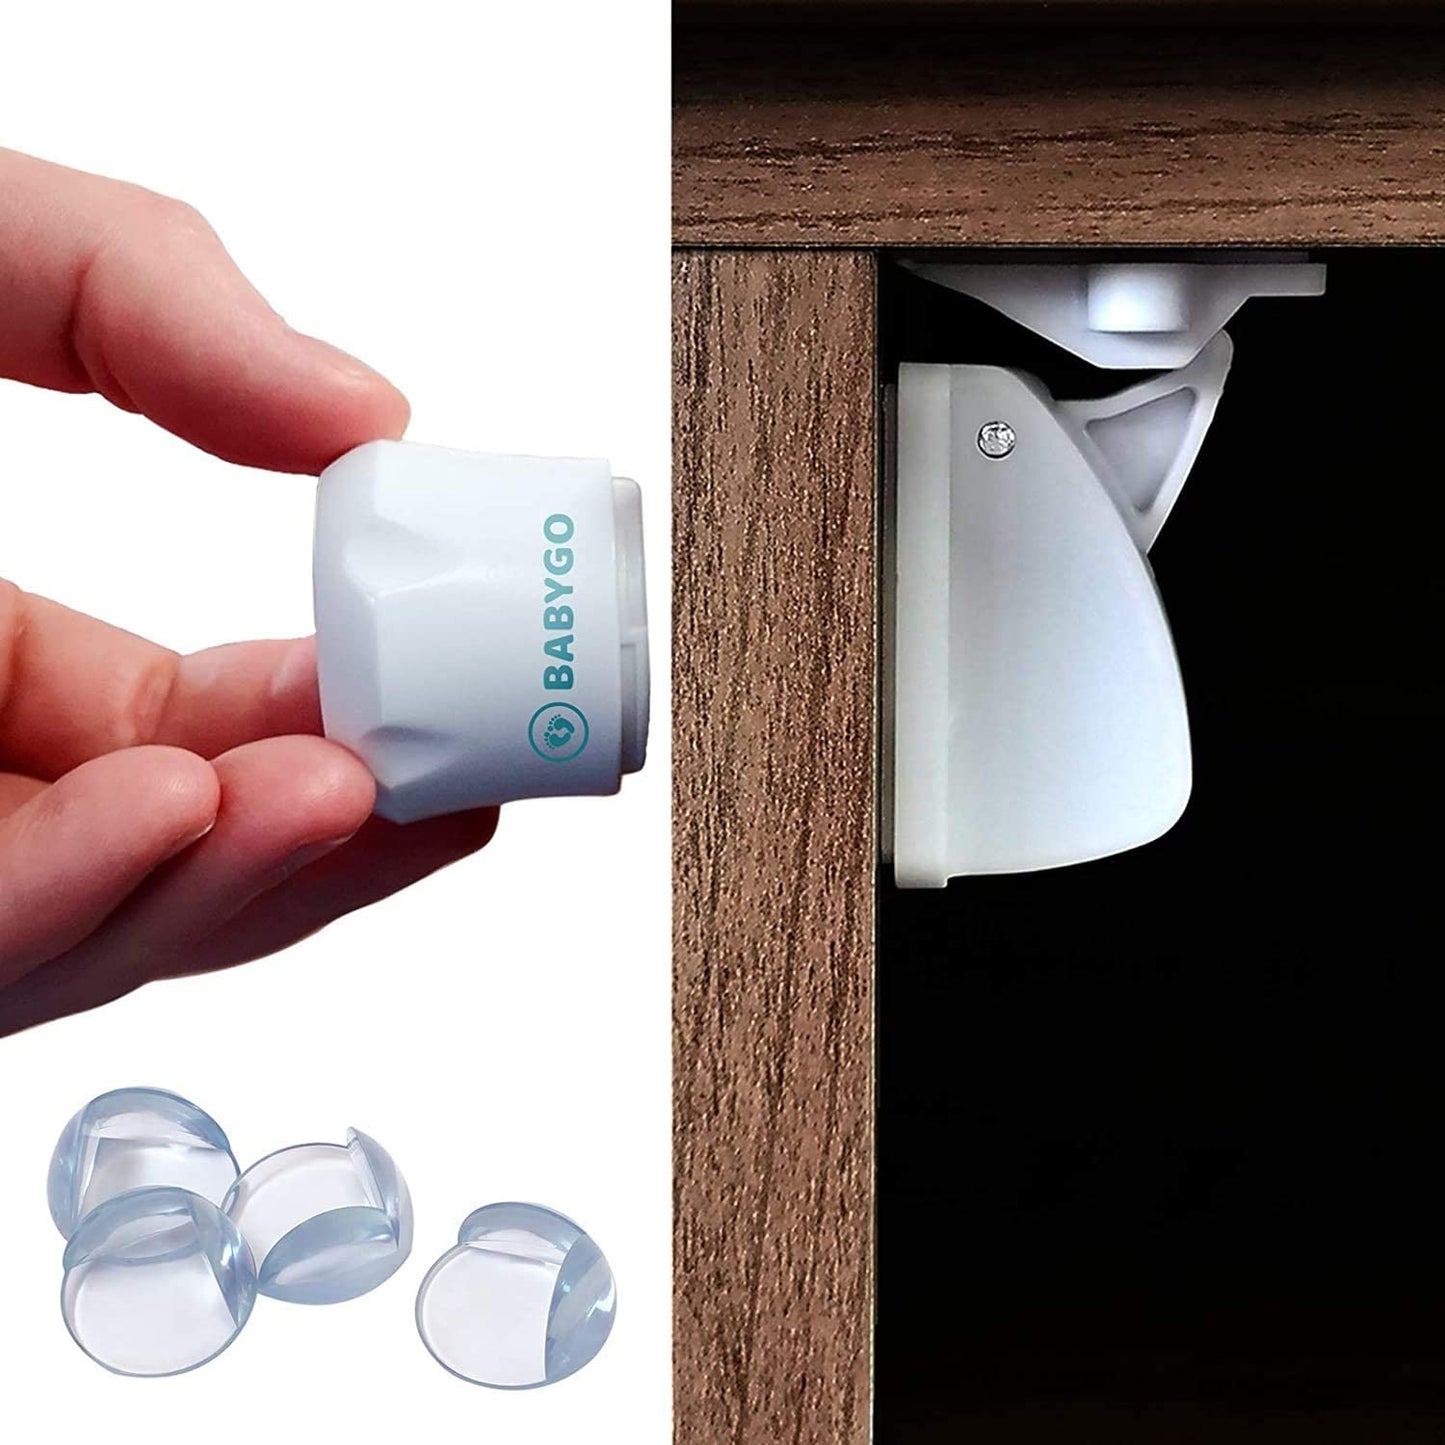 ® Magnetic Child Safety Cupboard Locks for Children; 10 Kitchen Cabinet Drawer Premium Locks, 2 Keys & 8 Free Corner Edge Protectors ; 30 Second Easy Install, No Screws, Baby Proof Your Home!